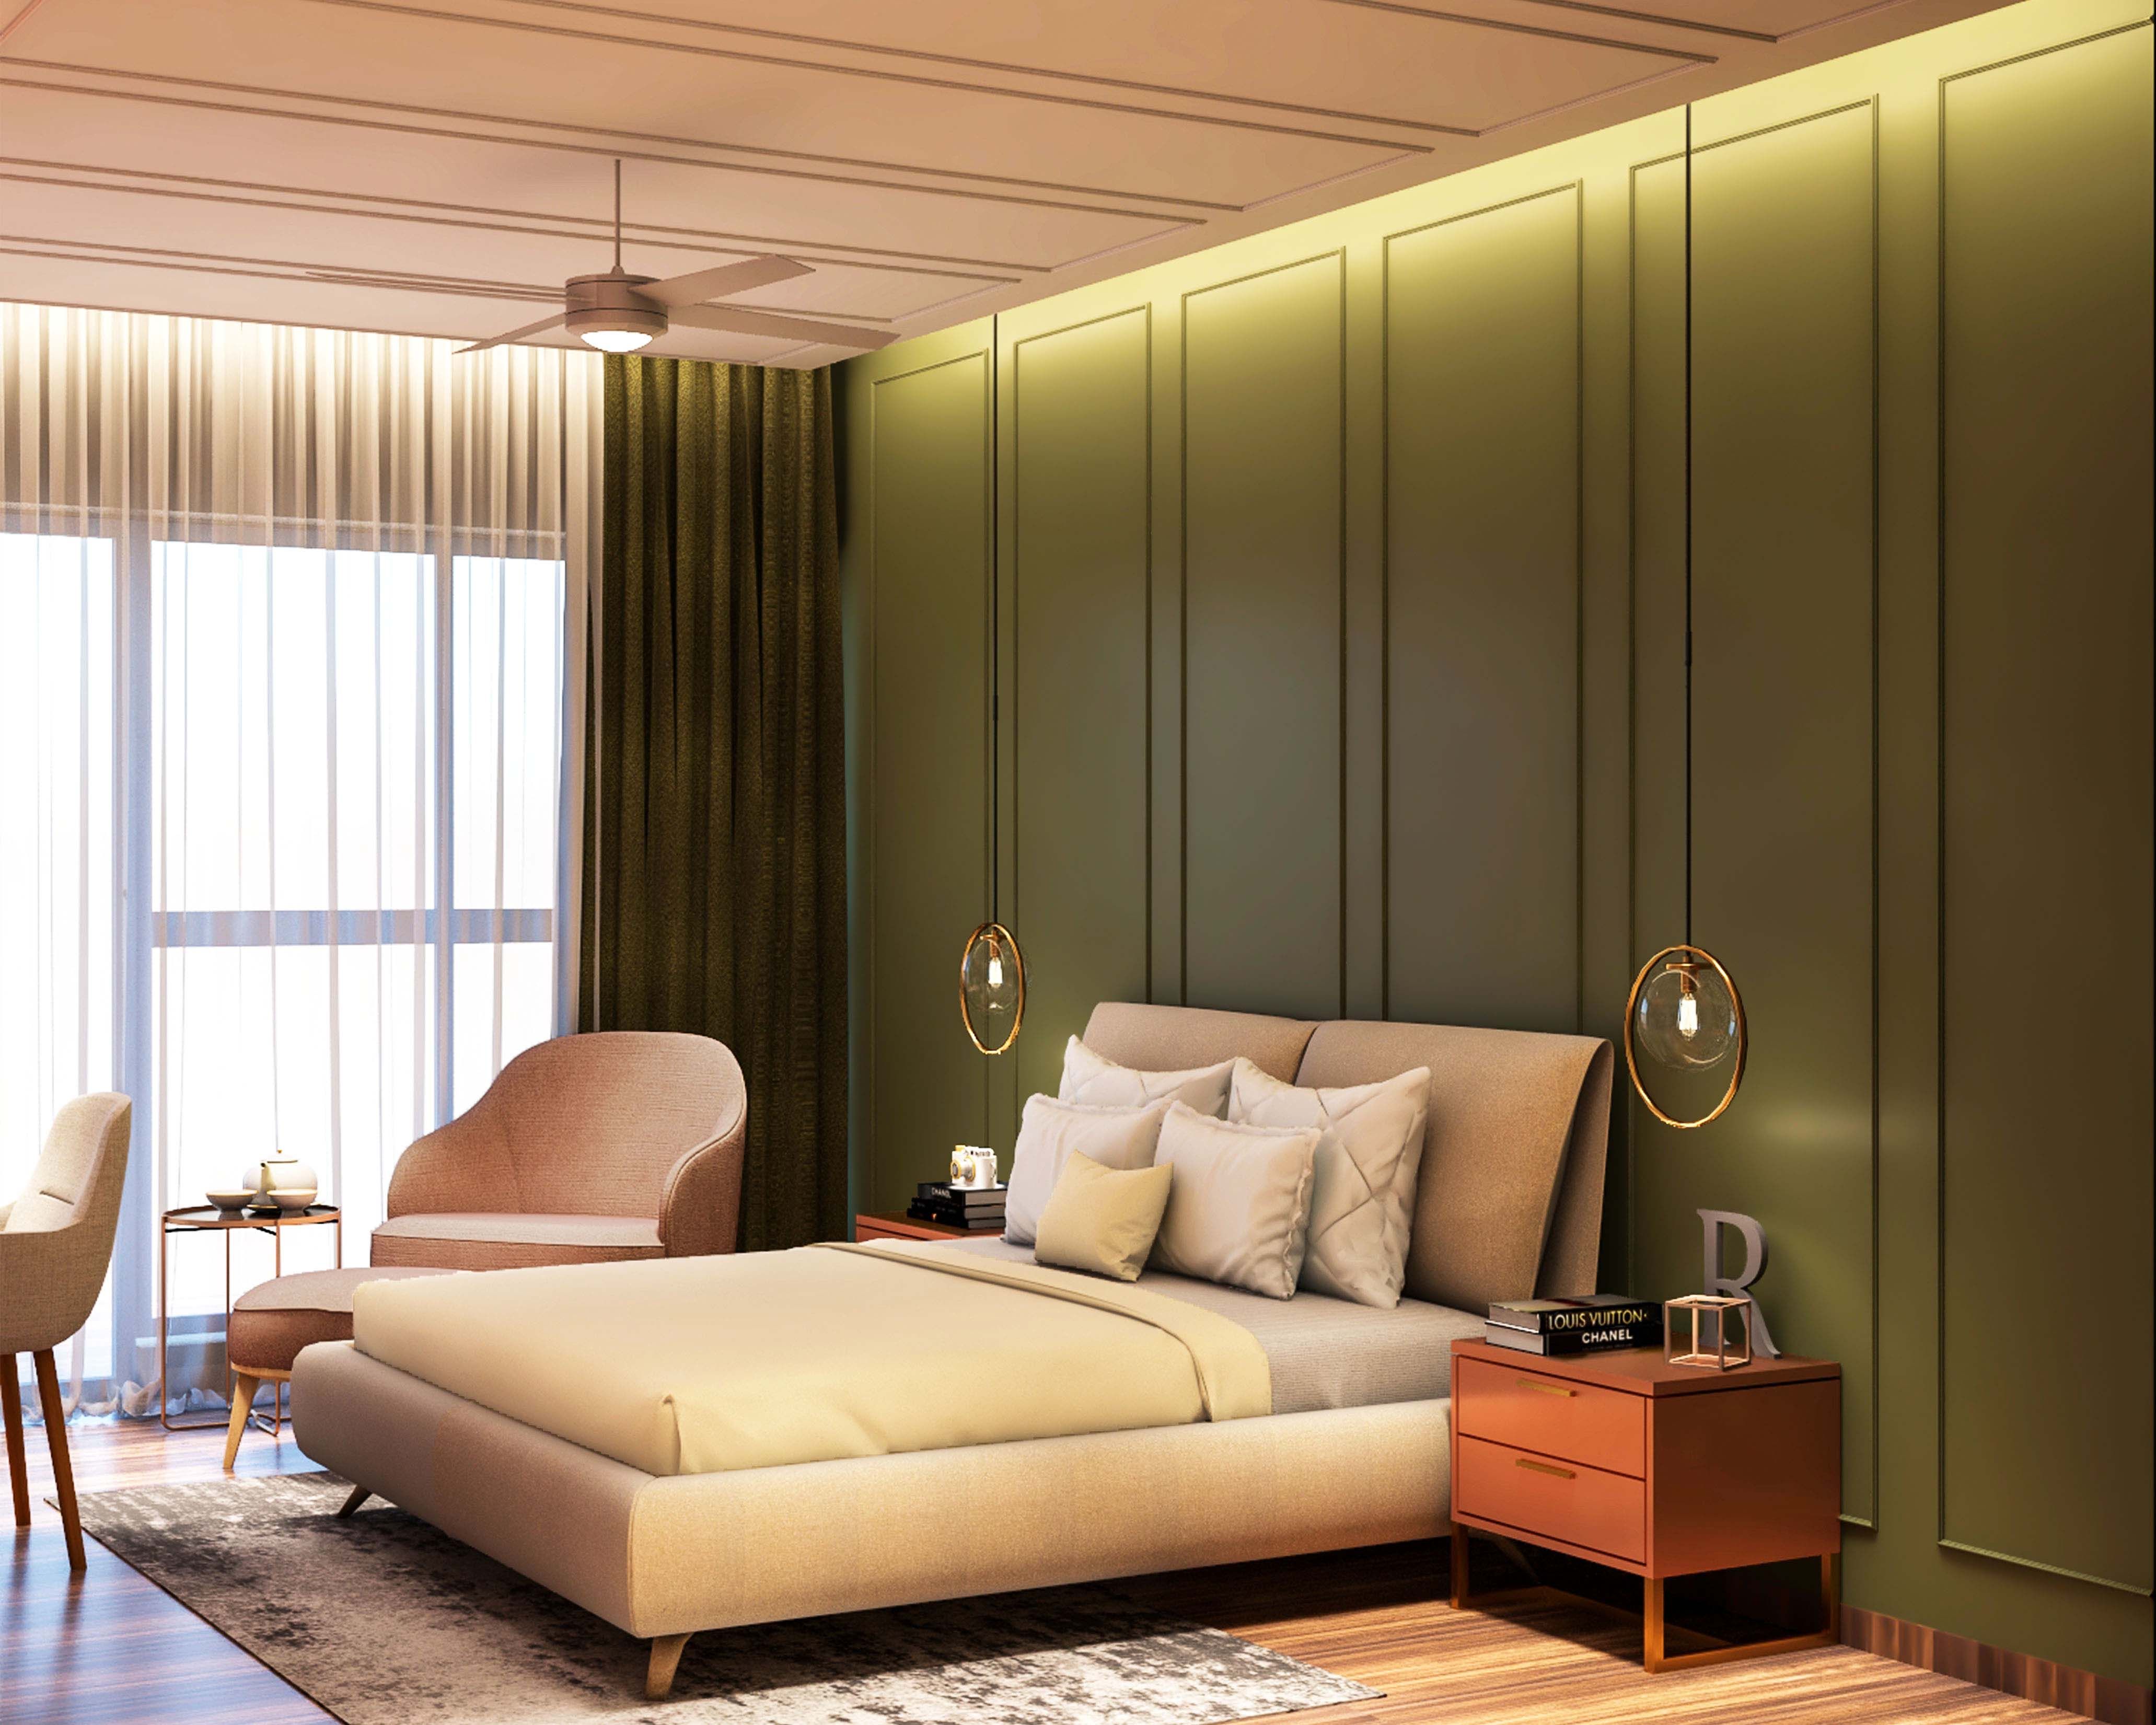 Contemporary Olive Green Bedroom Wall Design With Trims